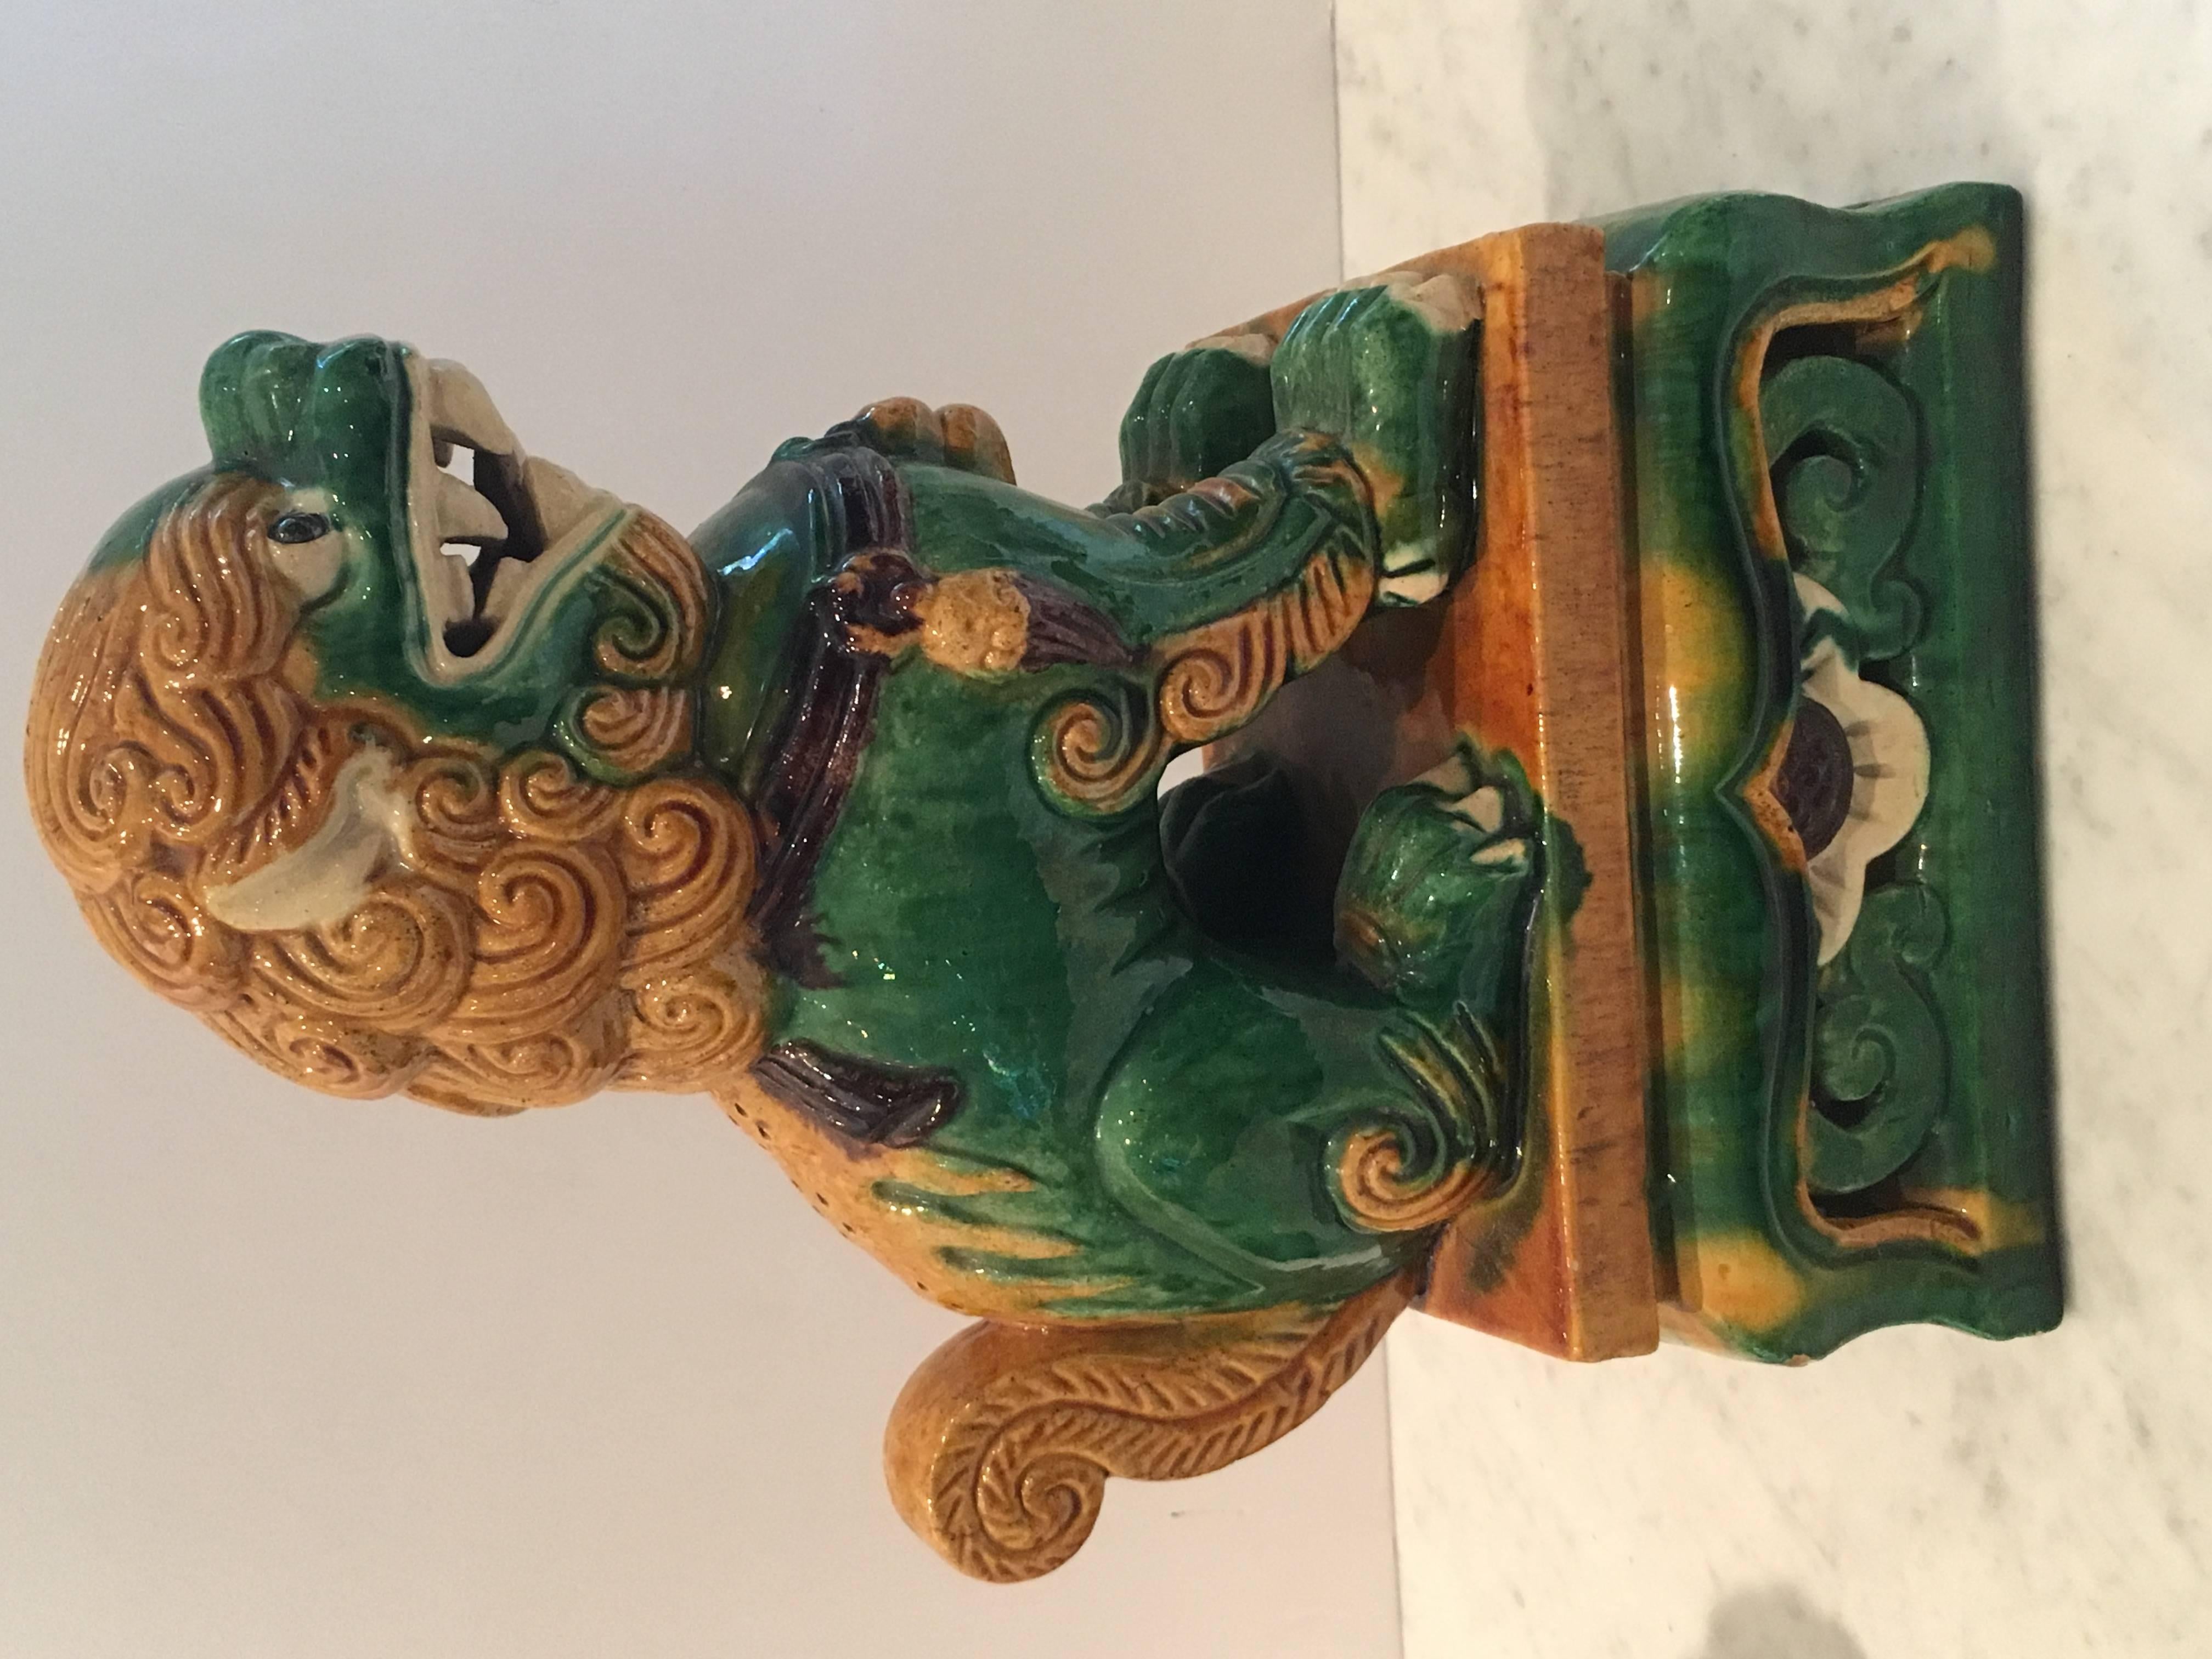 Colorful Pair of Mid-Century Chinese glazed porcelain foo dogs. Almost identical, the male has more green glaze on face, whereas the female has more green glaze on feet and base. Wonderful attention to detail.